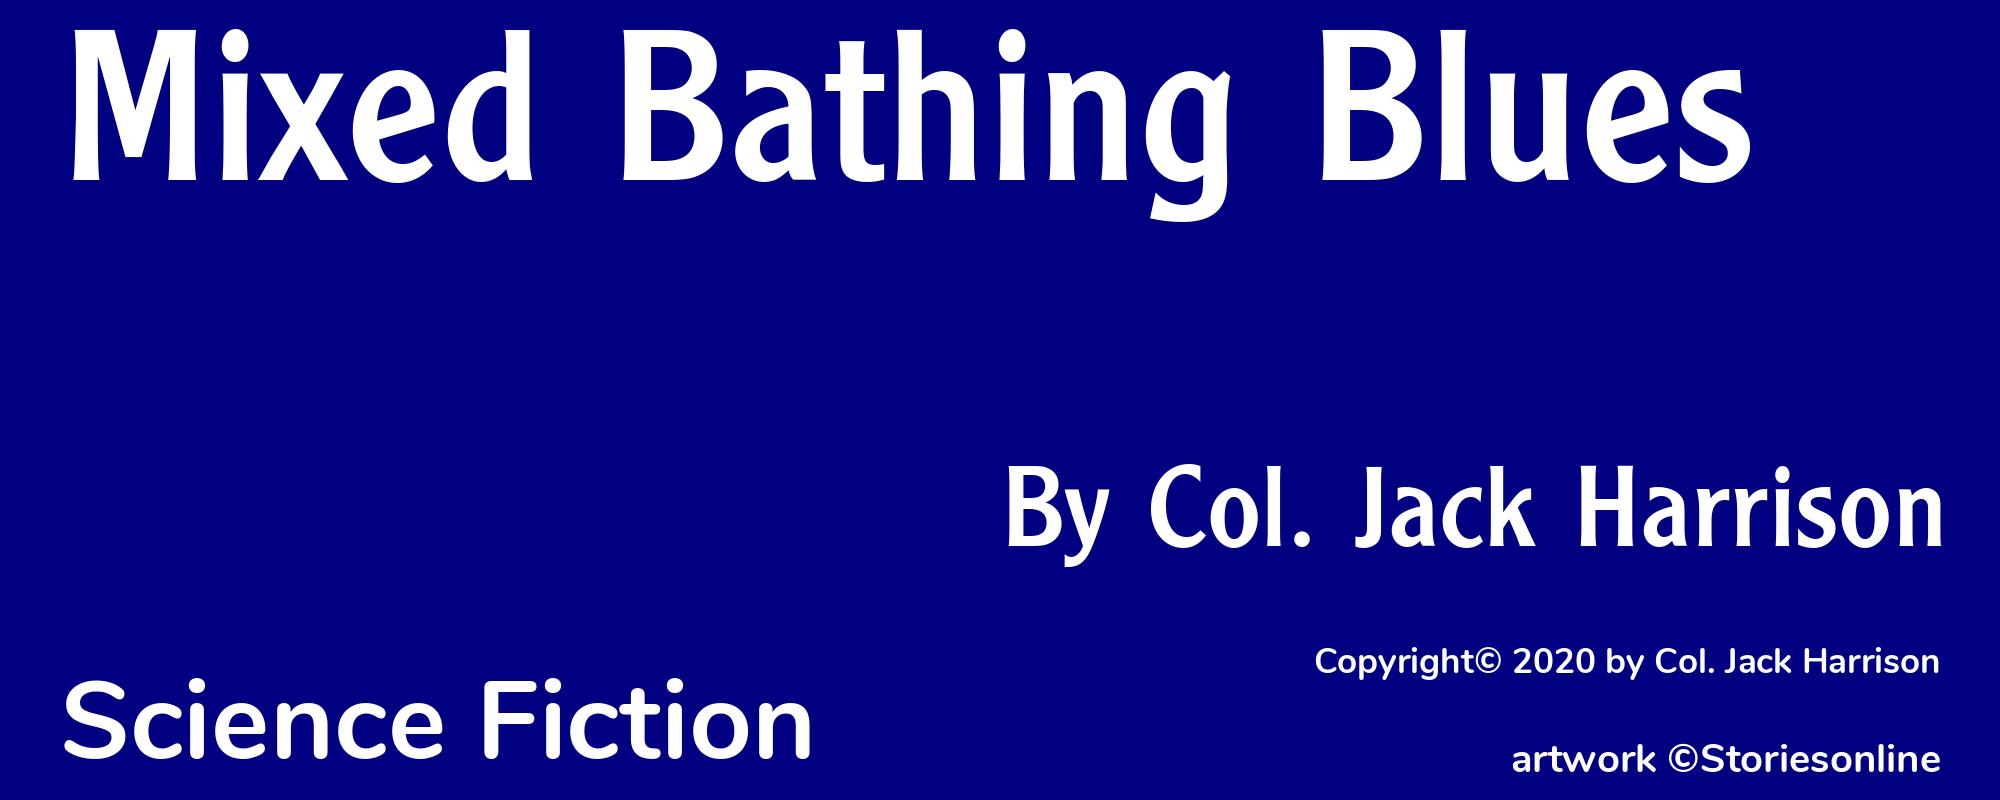 Mixed Bathing Blues - Cover